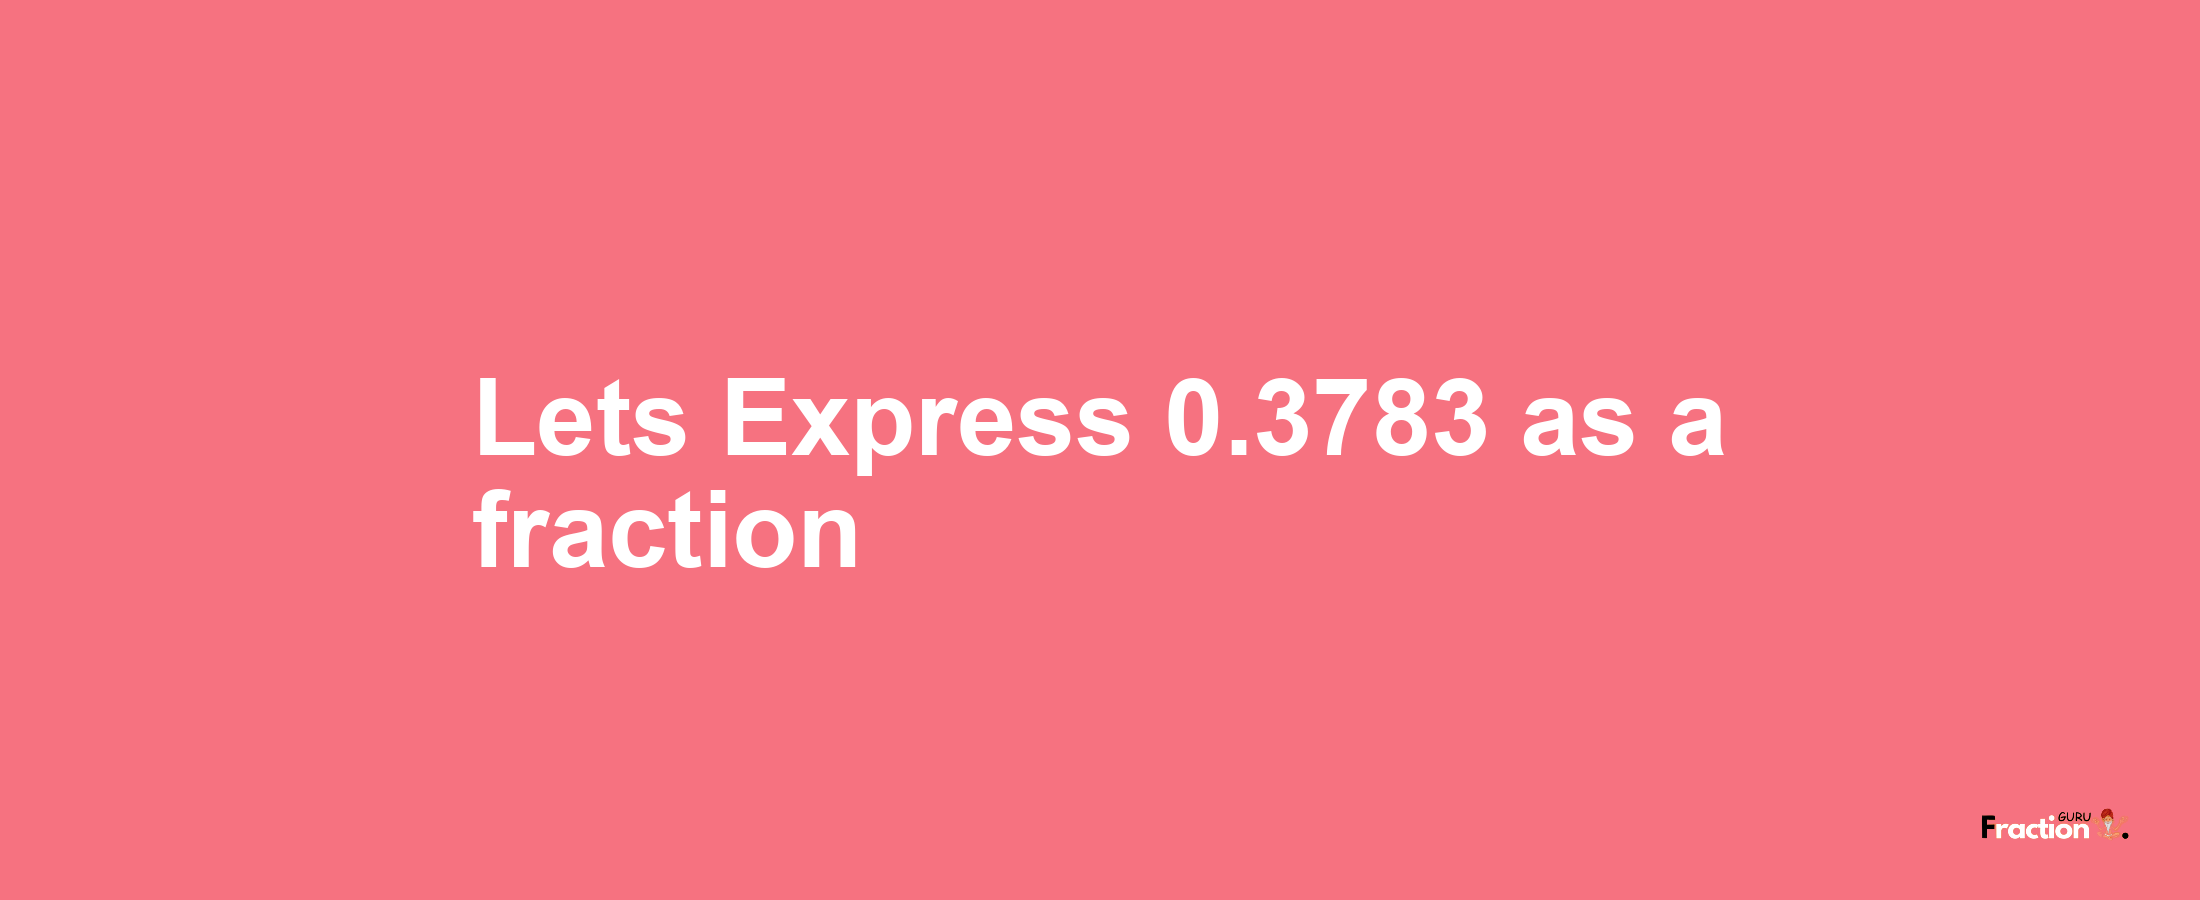 Lets Express 0.3783 as afraction